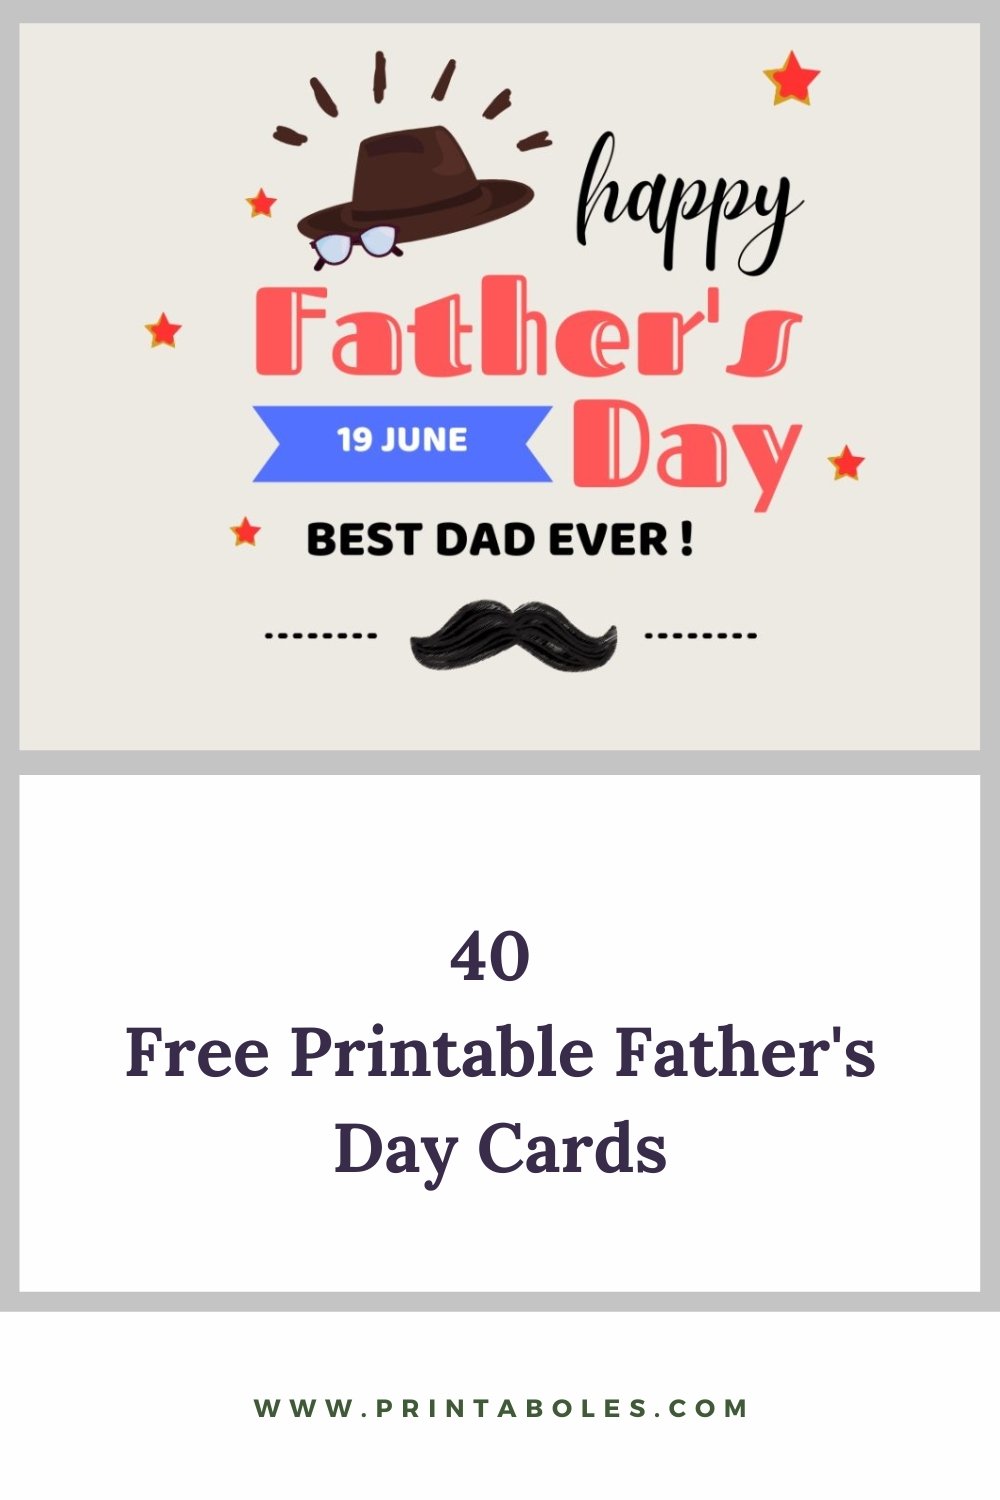 40 Free Printable Father's Day Cards